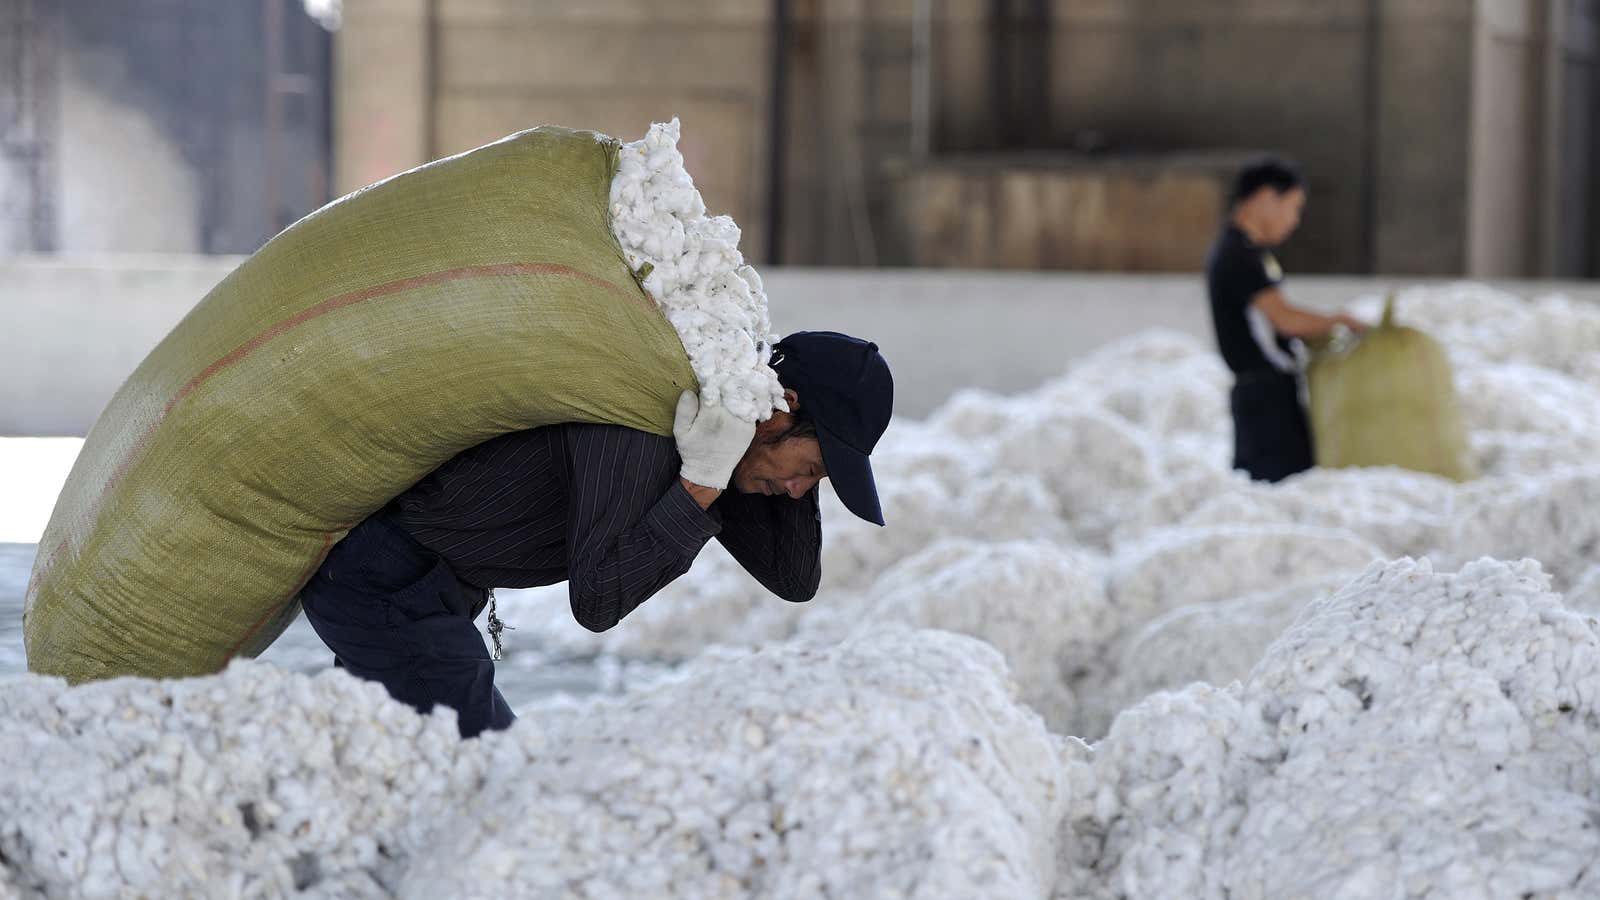 The fashion industry needs a better way to keep all this out of landfills.